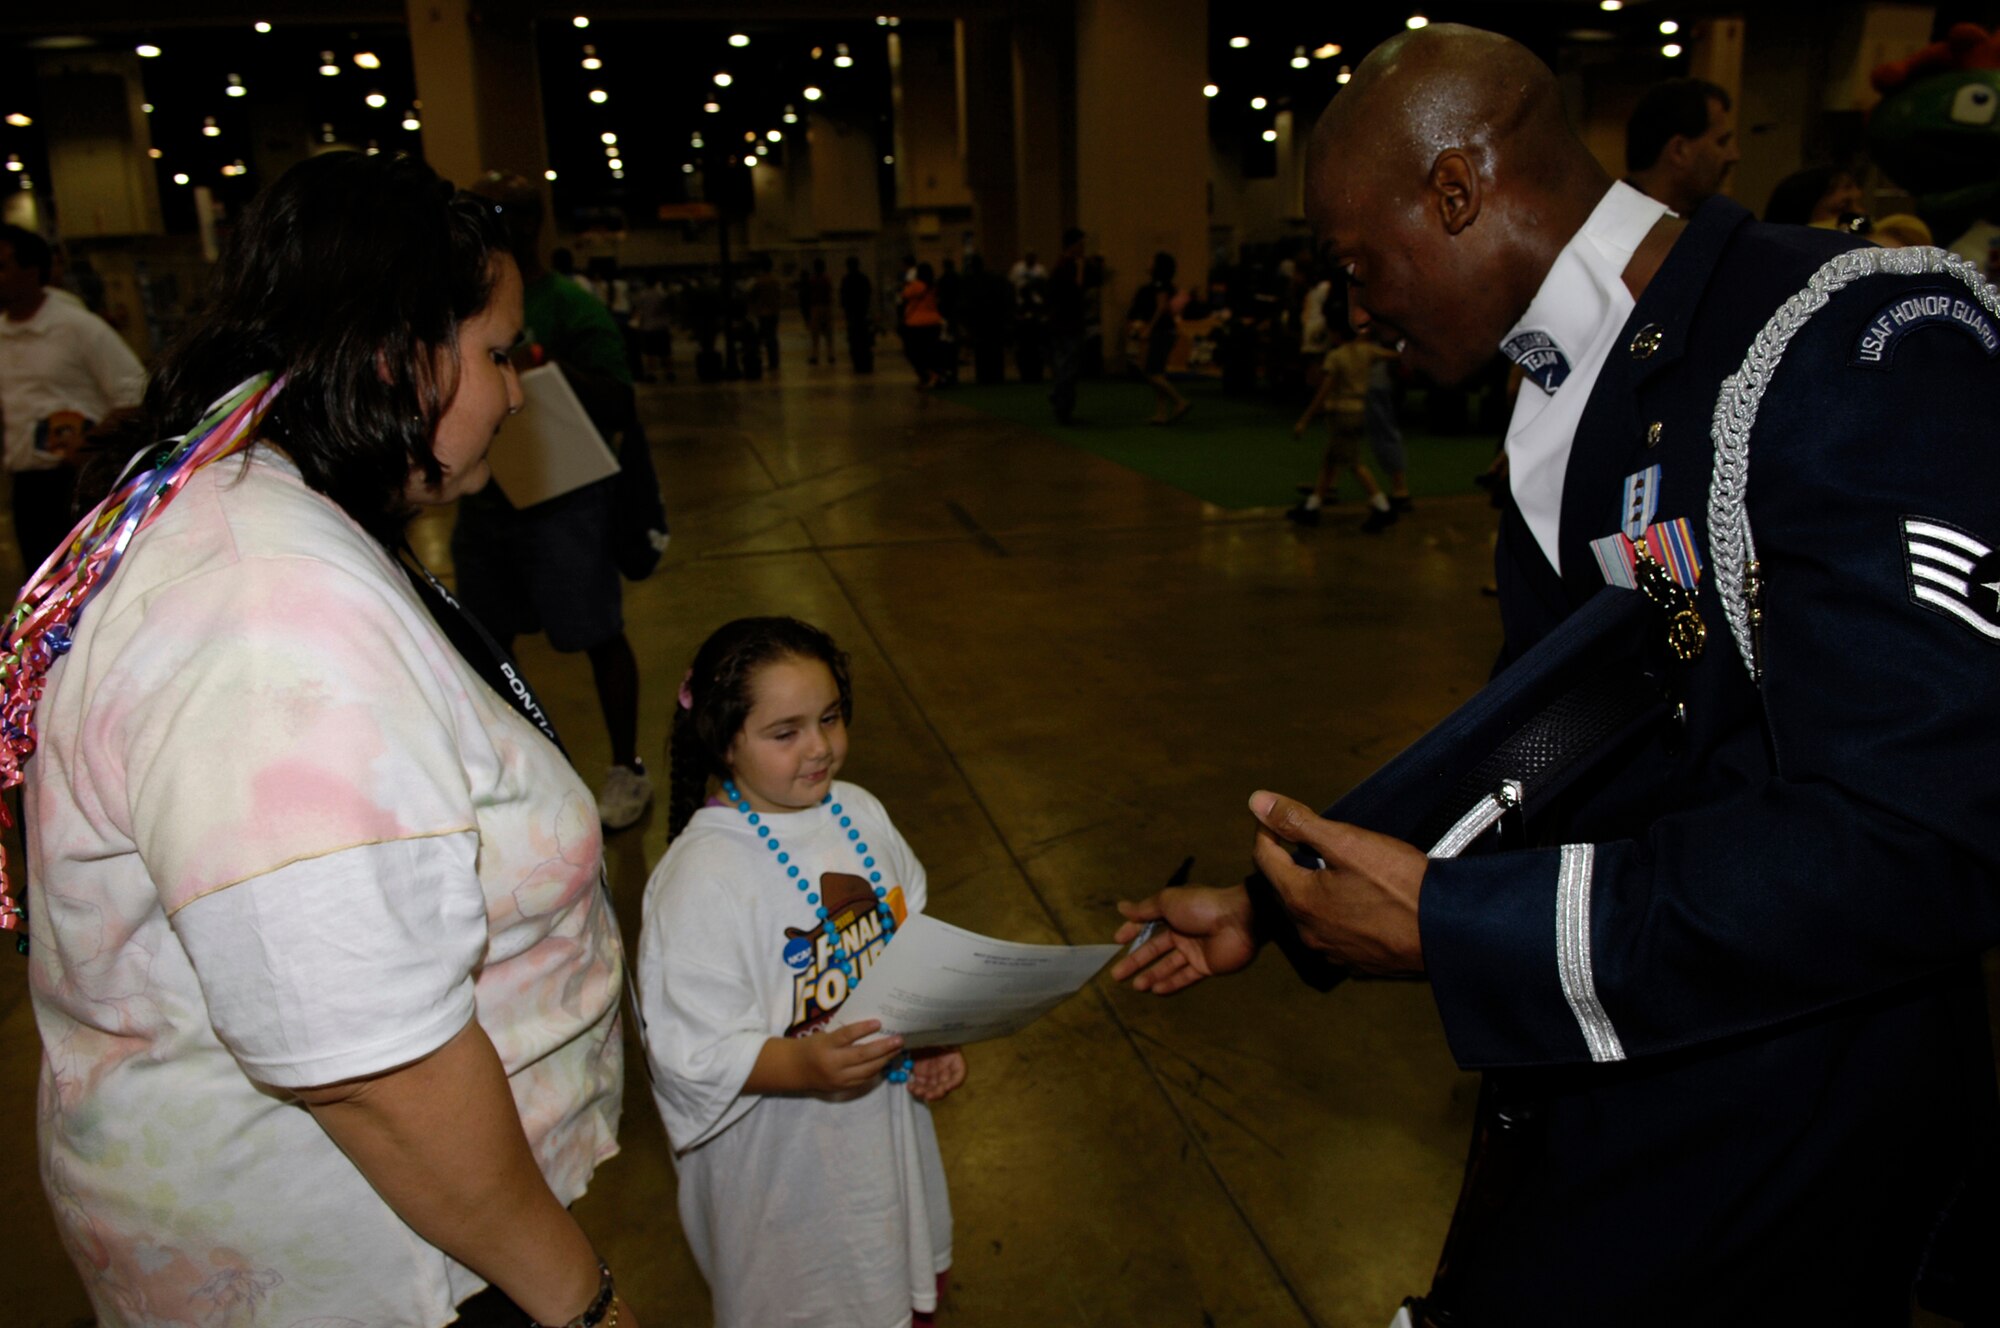 Staff Sgt. Theodore Miller, USAF Honor Guard Drill Team NCOIC, autographs an Air Force info card for an enthusiastic NCAA Men's Final Four fan in San Antonio, Texas. The Drill Team is the travelling component of the Air Force Honor Guard and tours worldwide showcasing the precision of today's Air Force, to recruit, retain and inspire Airmen for the Air Force mission. (U.S. Air Force photo by SSgt Raymond Mills)